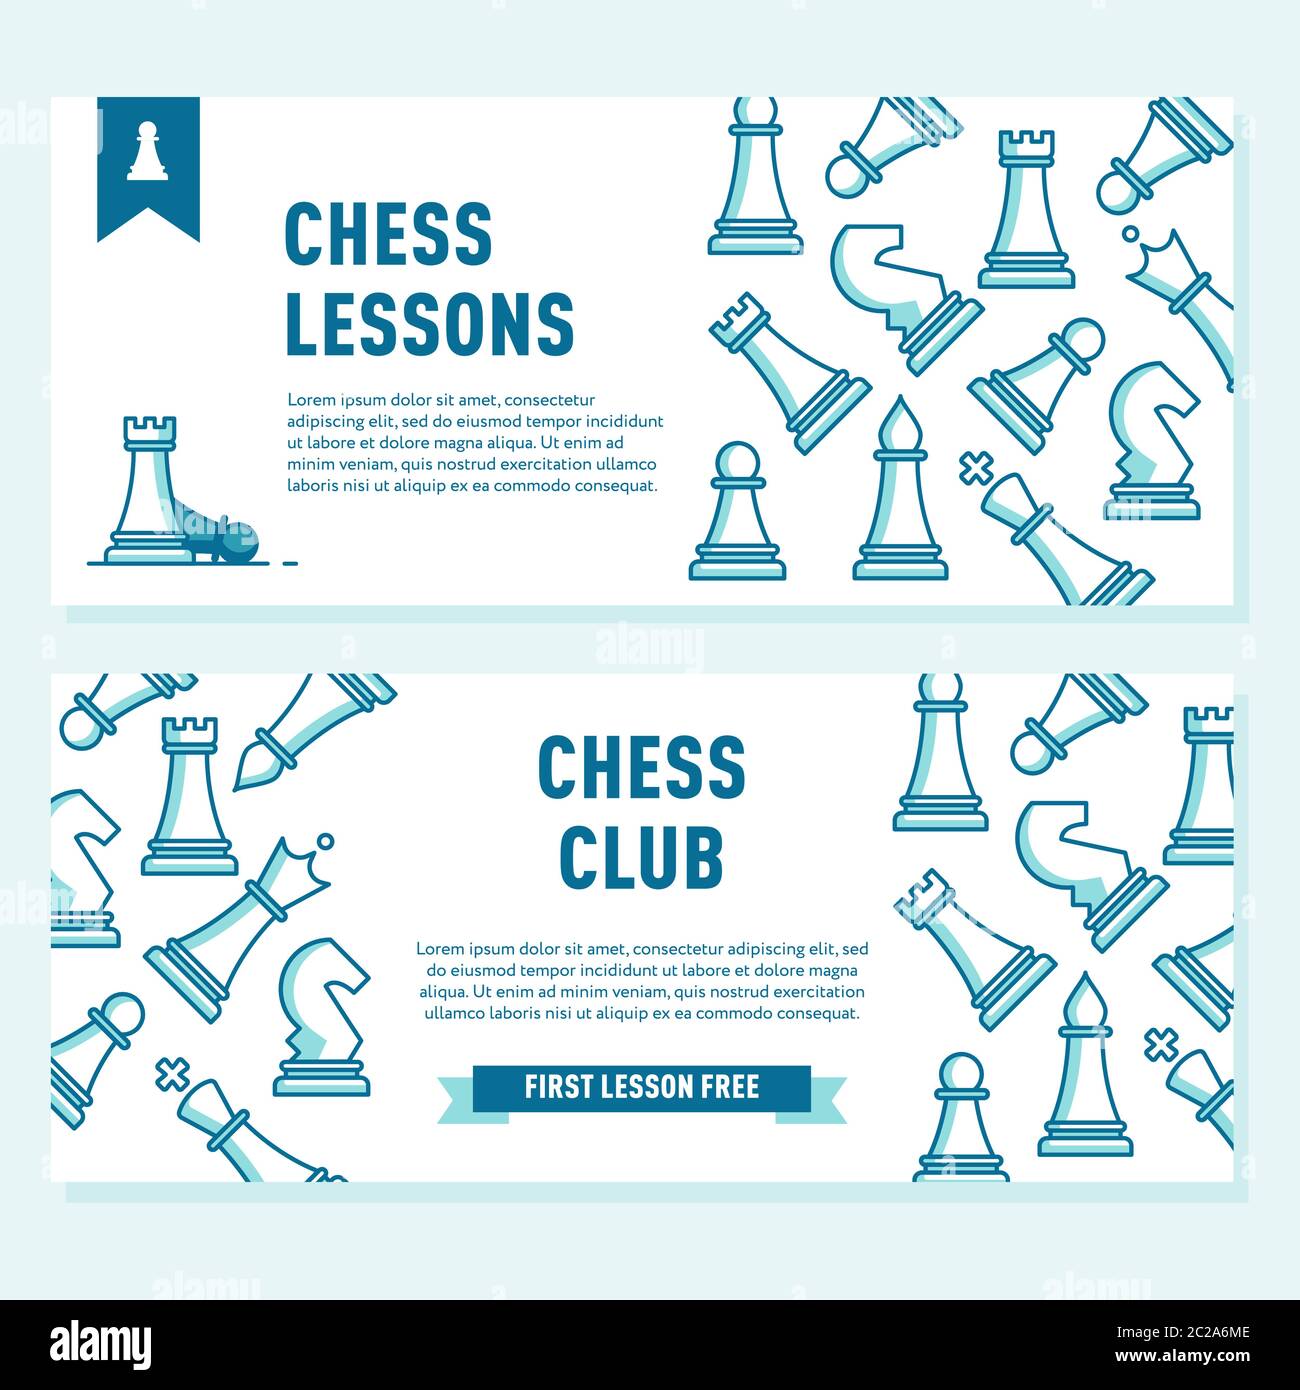 Free printable chess opening moves poster.